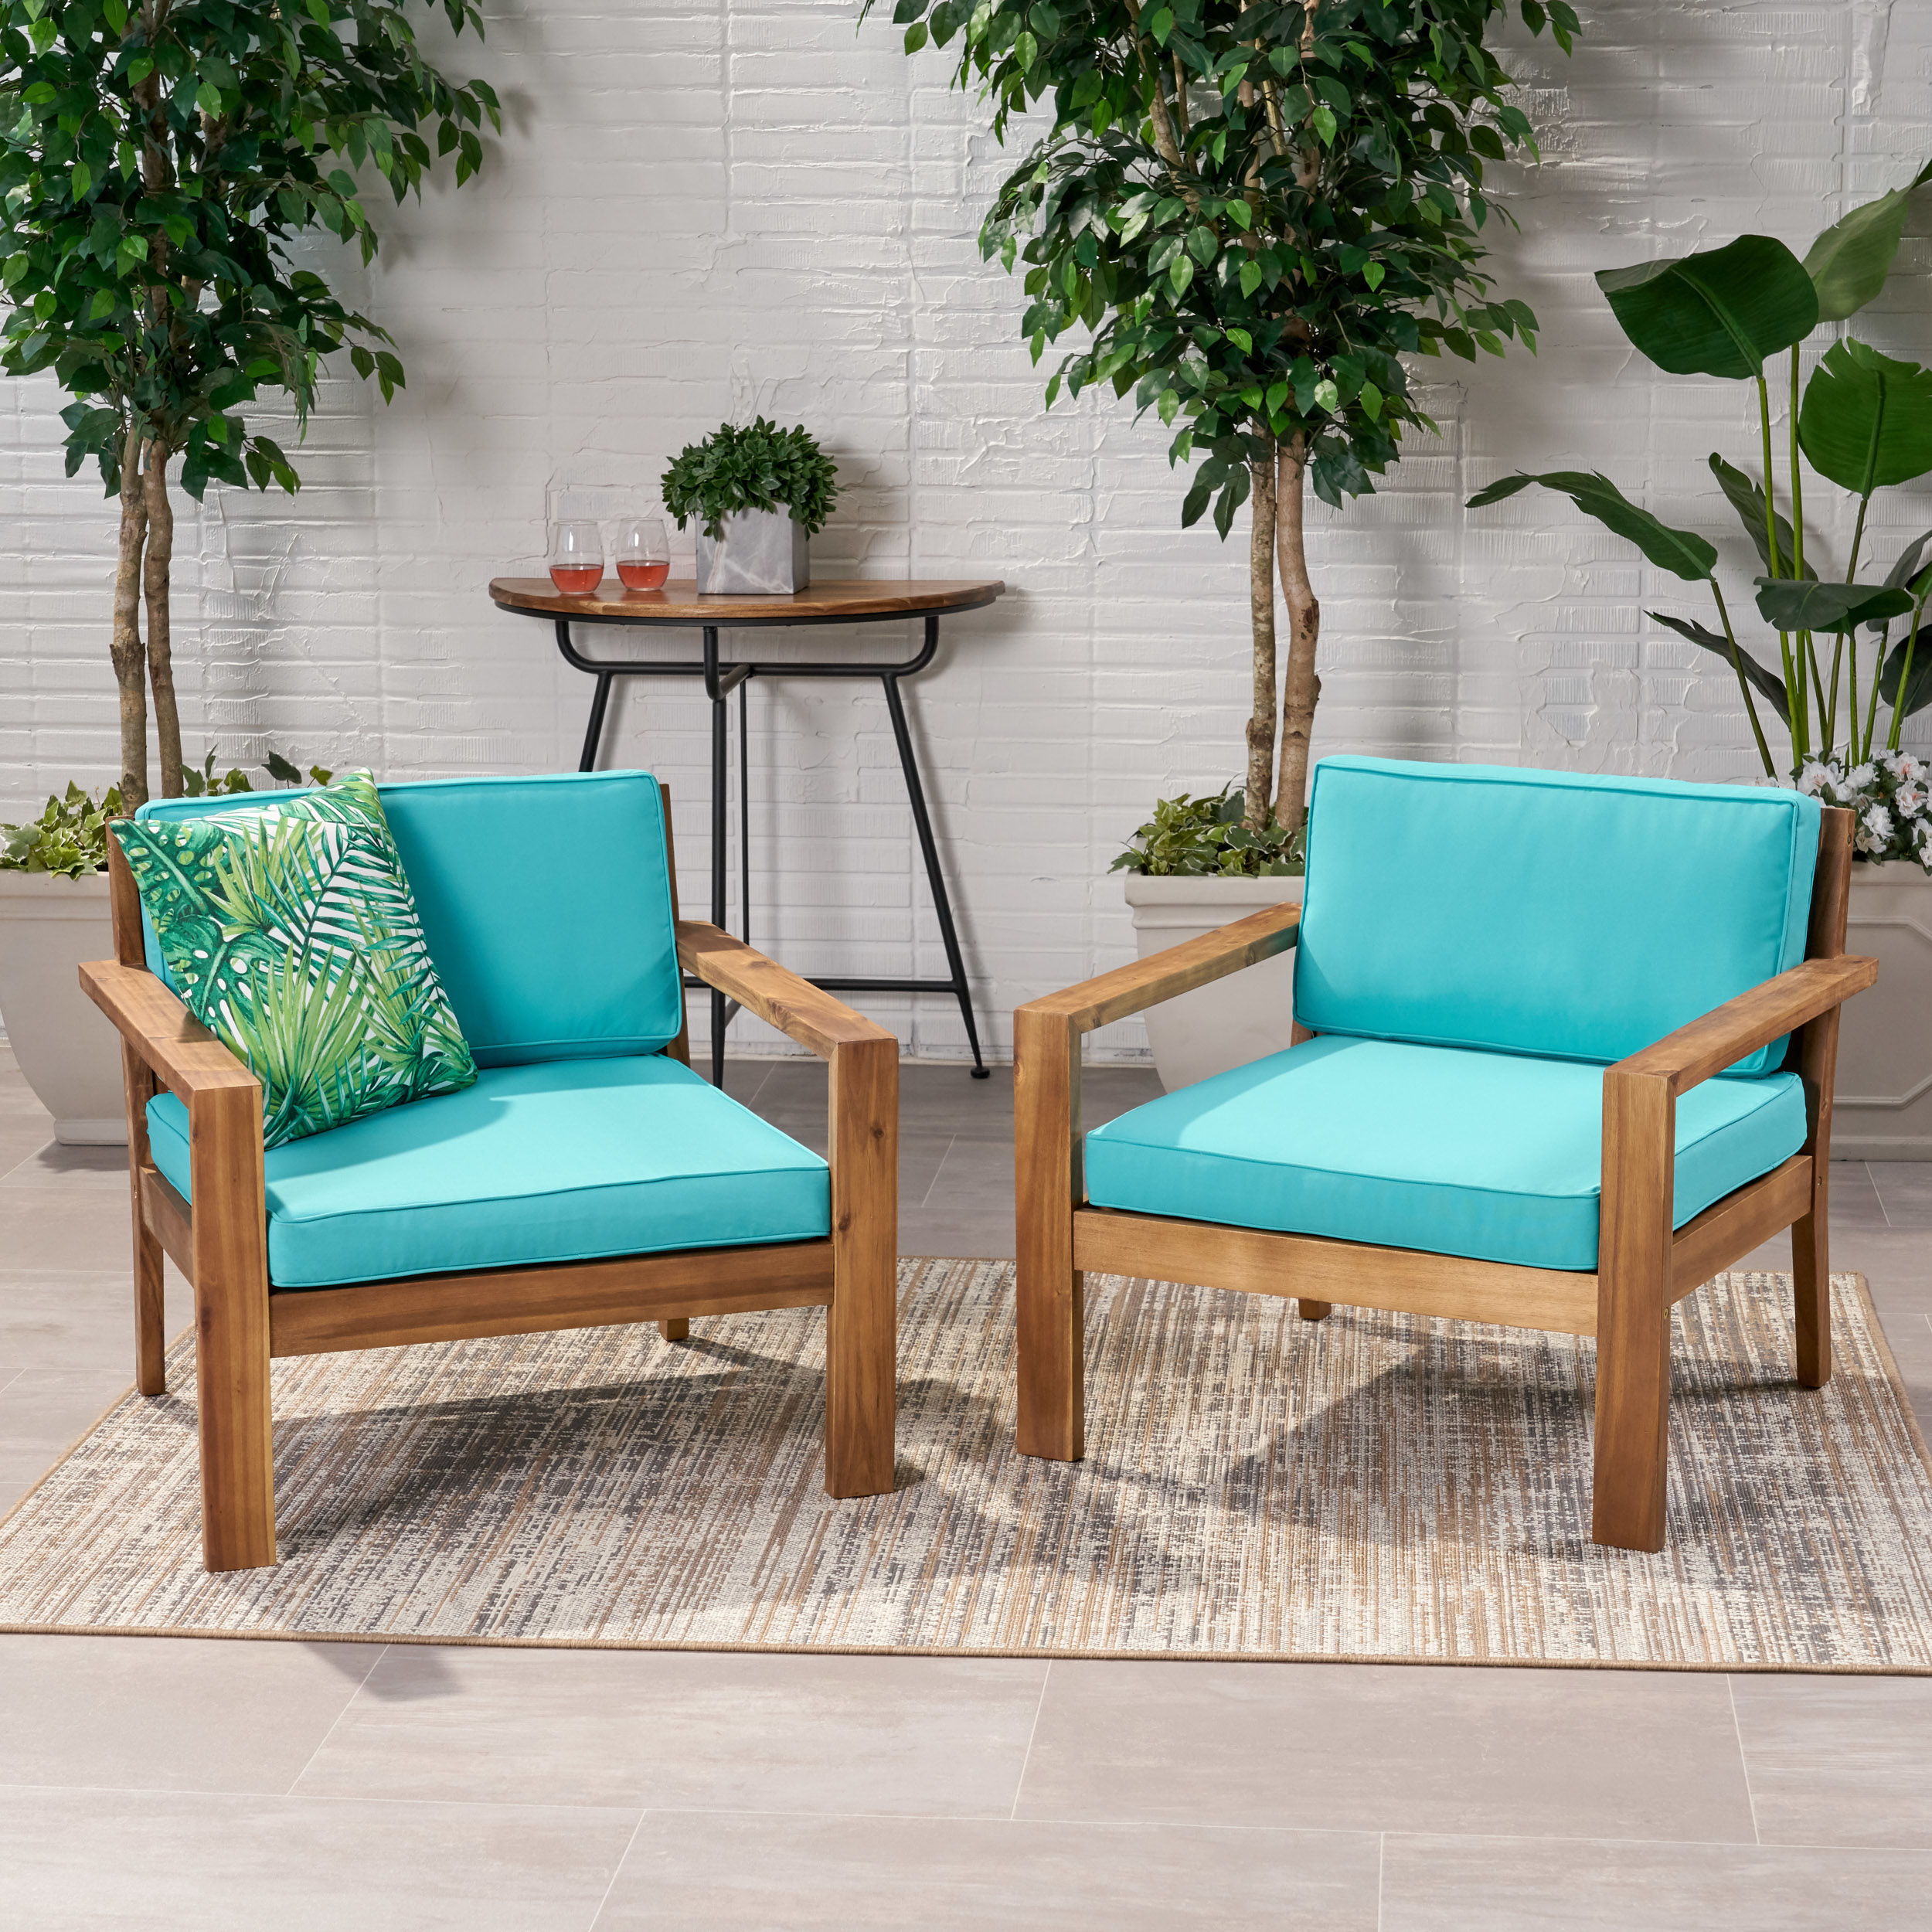 Afra Outdoor Acacia Wood Club Chairs With Cushions (Set Of 2) - Teak Finish, Teal